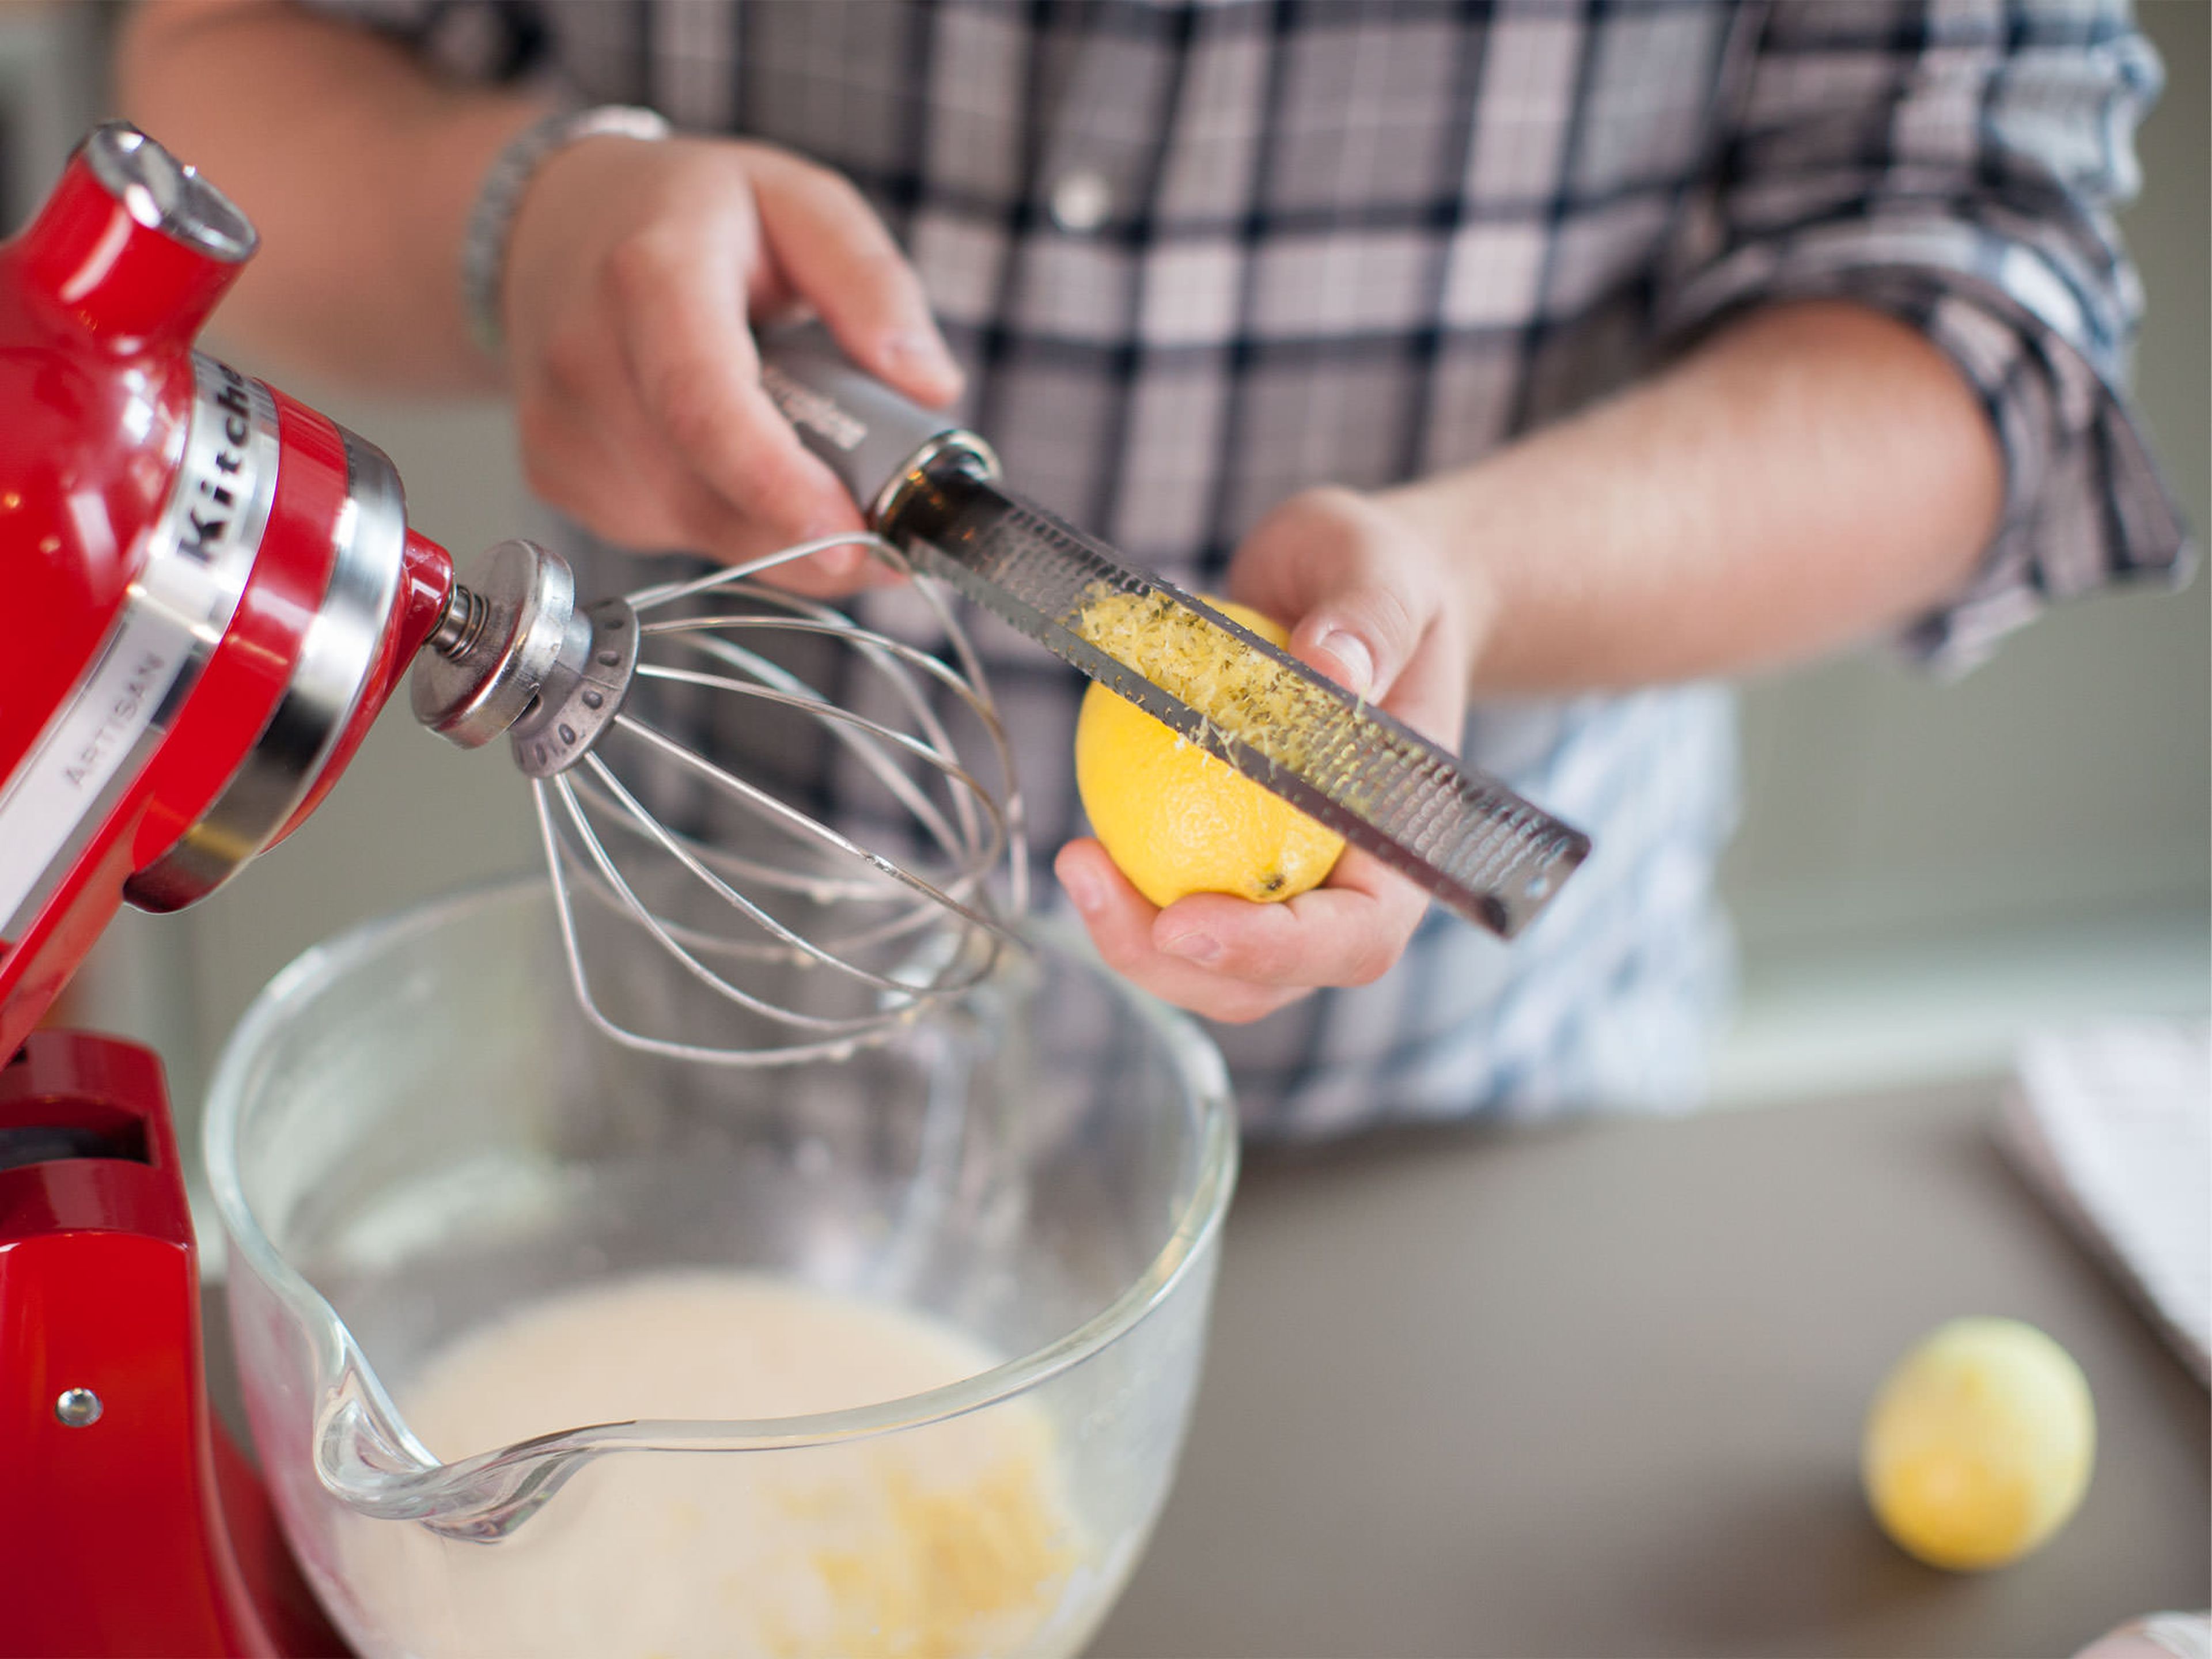 Mix remaining eggs and sugar in a stand mixer until well combined. Add mascarpone and whipping cream. Add lemon zest. Juice lemons and add some of the juice.